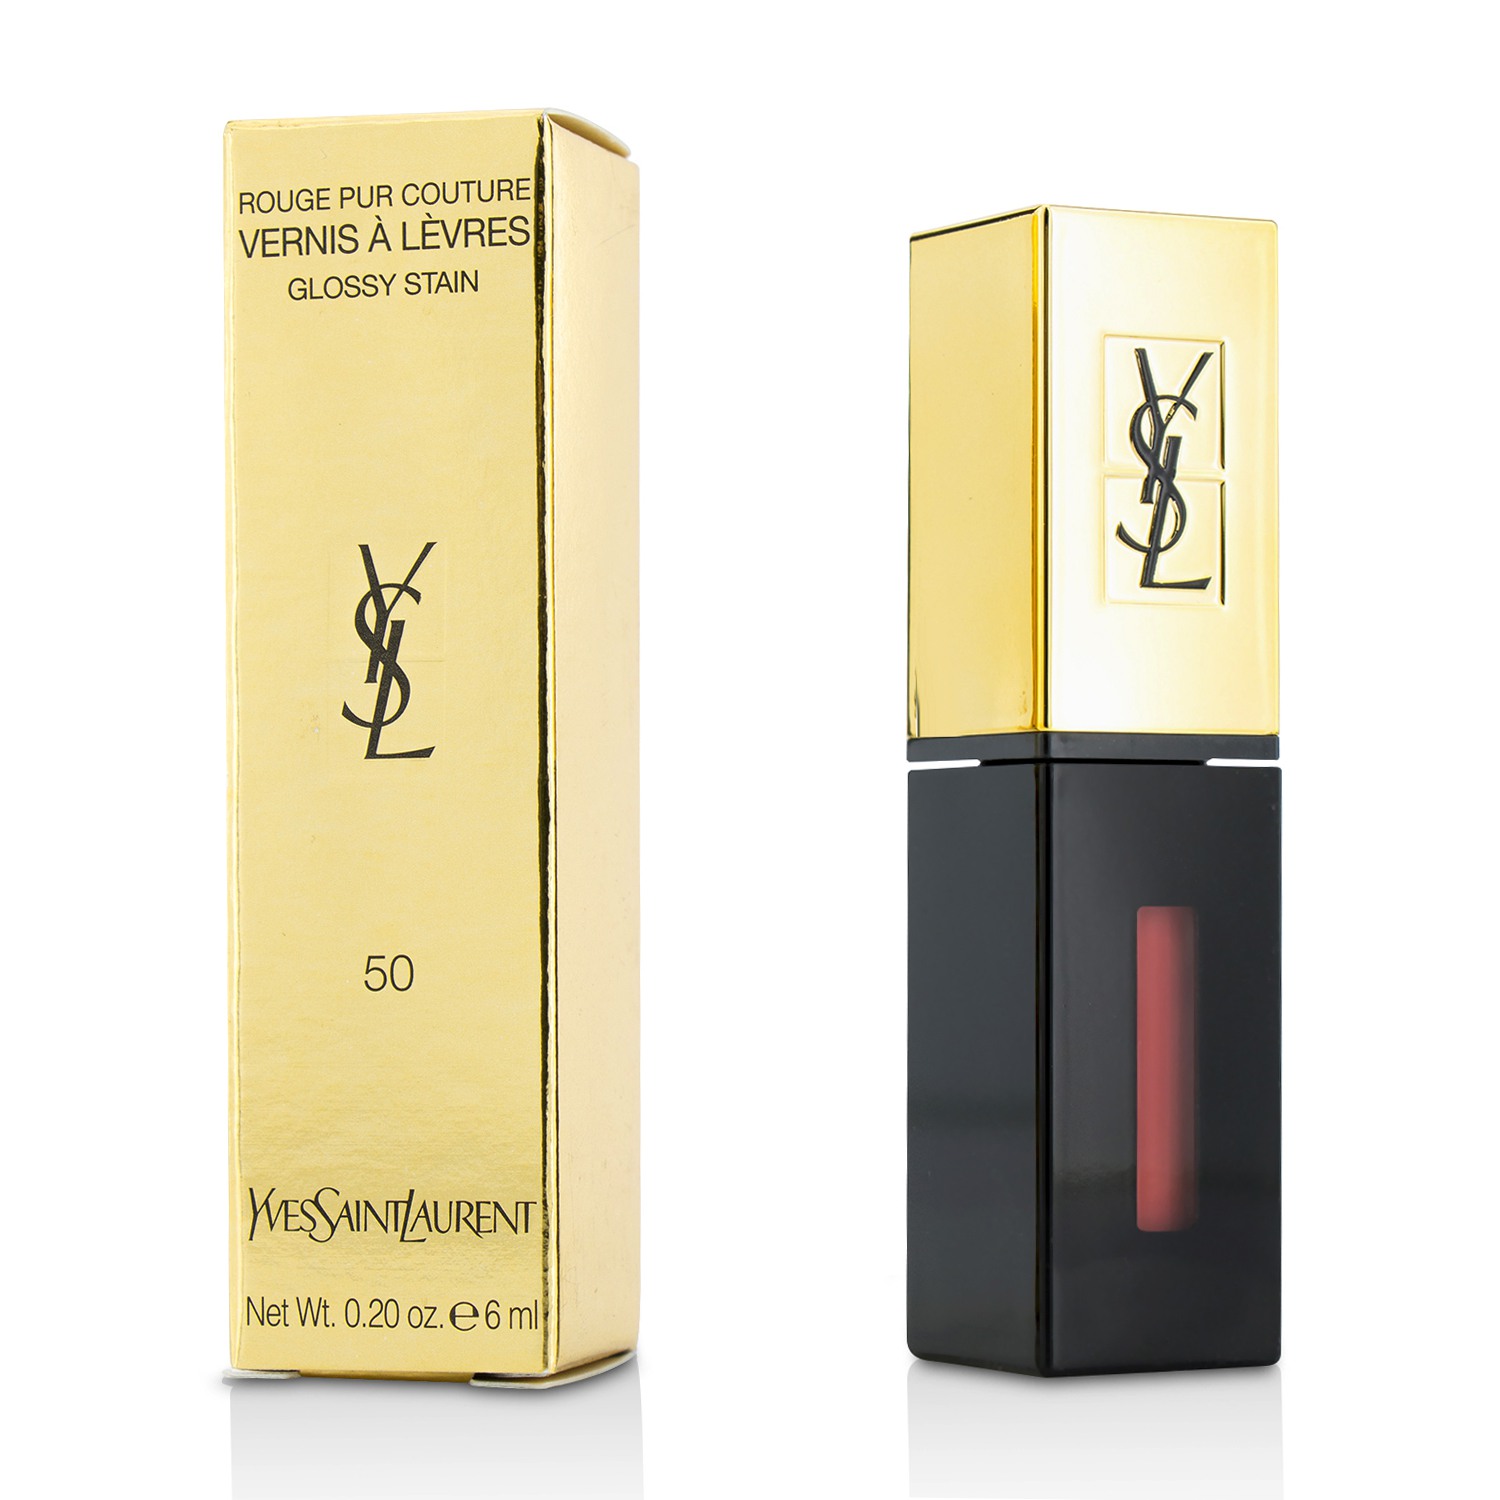 Rouge Pur Couture Vernis a Levres Glossy Stain - # 50 Encre Nude Yves Saint Laurent Image